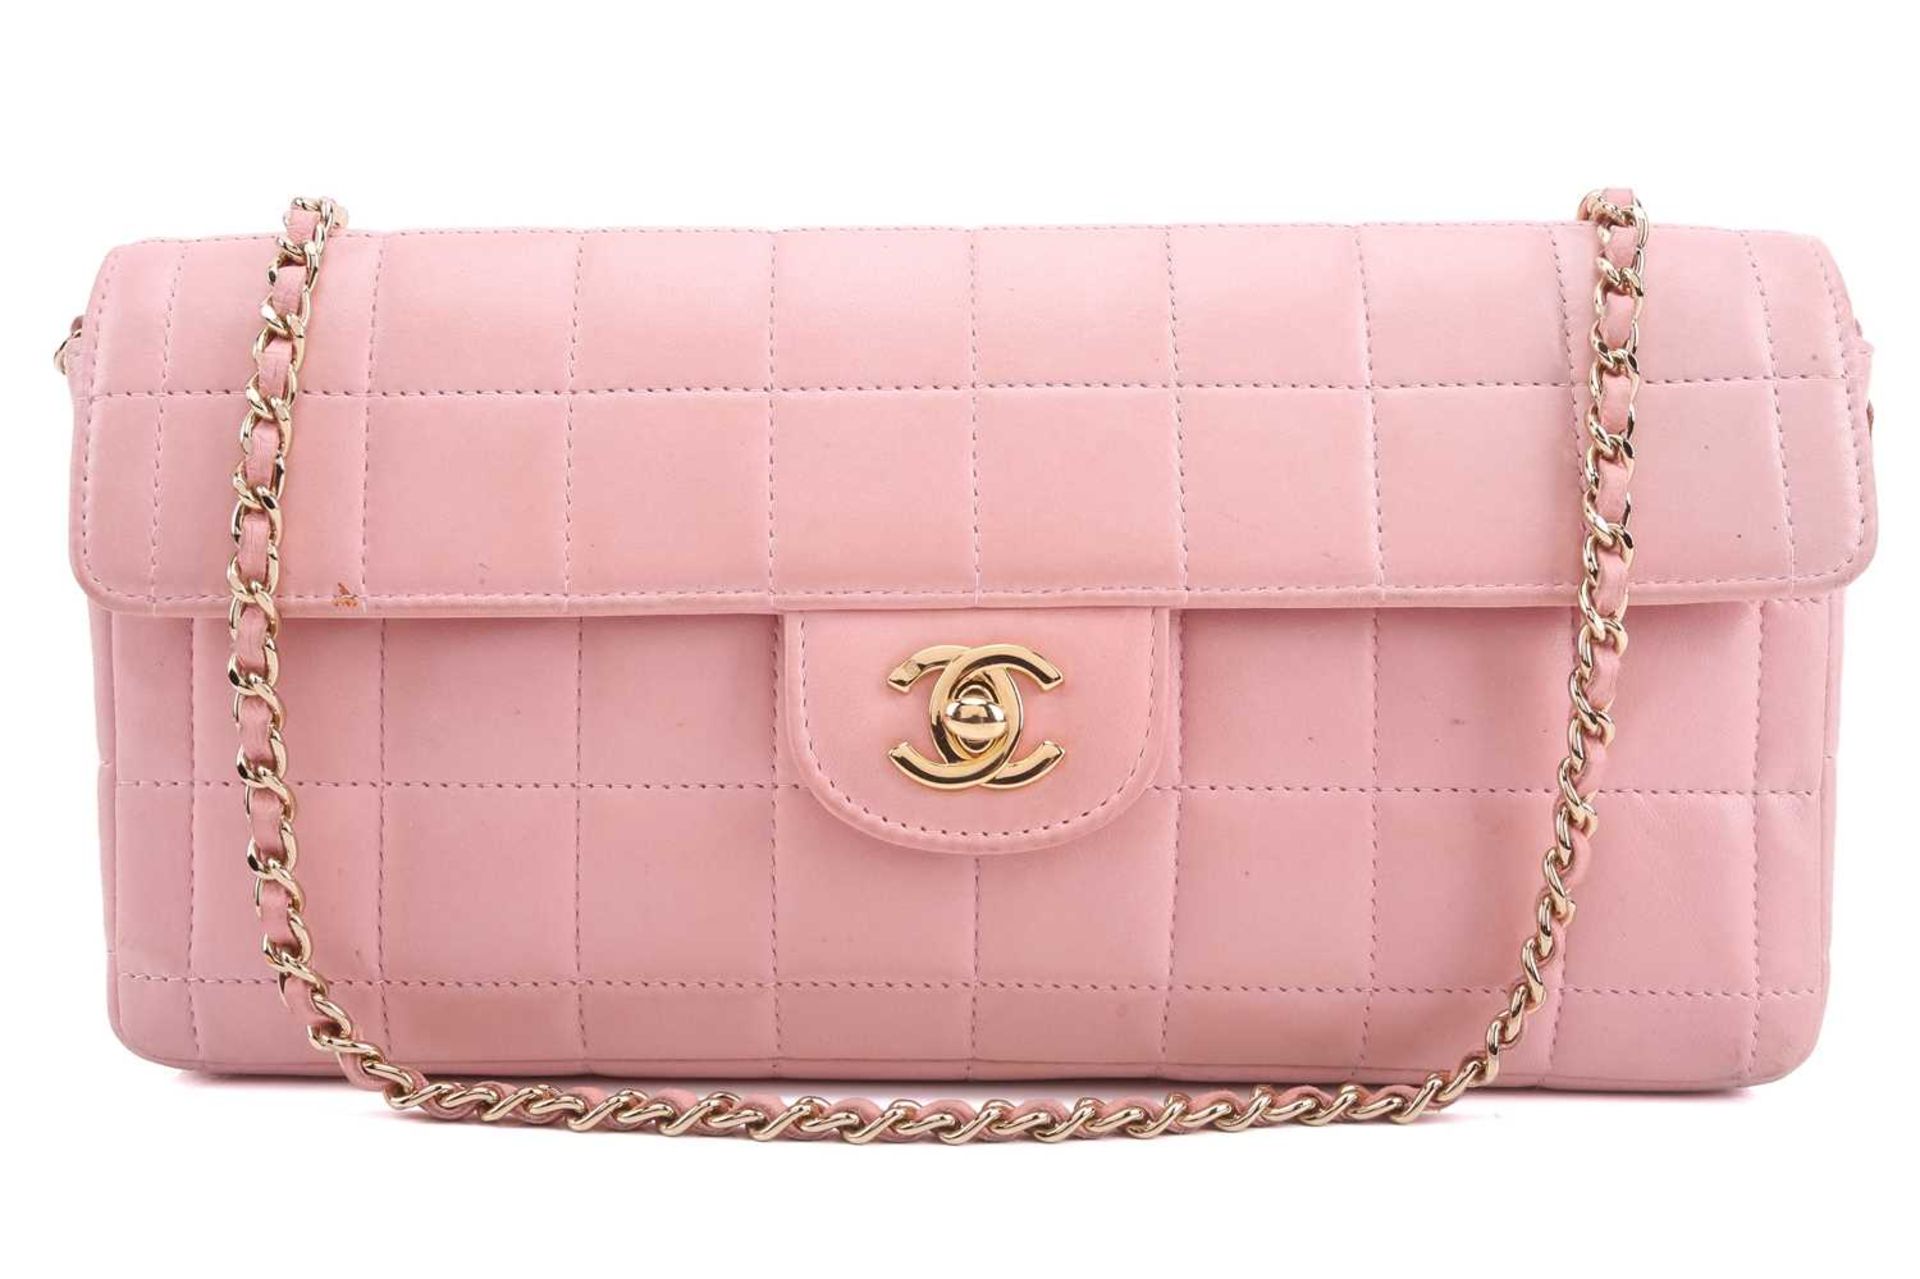 Chanel - an East West Chocolate Bar bag in baby pink lambskin leather, elongated rectangular body - Image 2 of 13